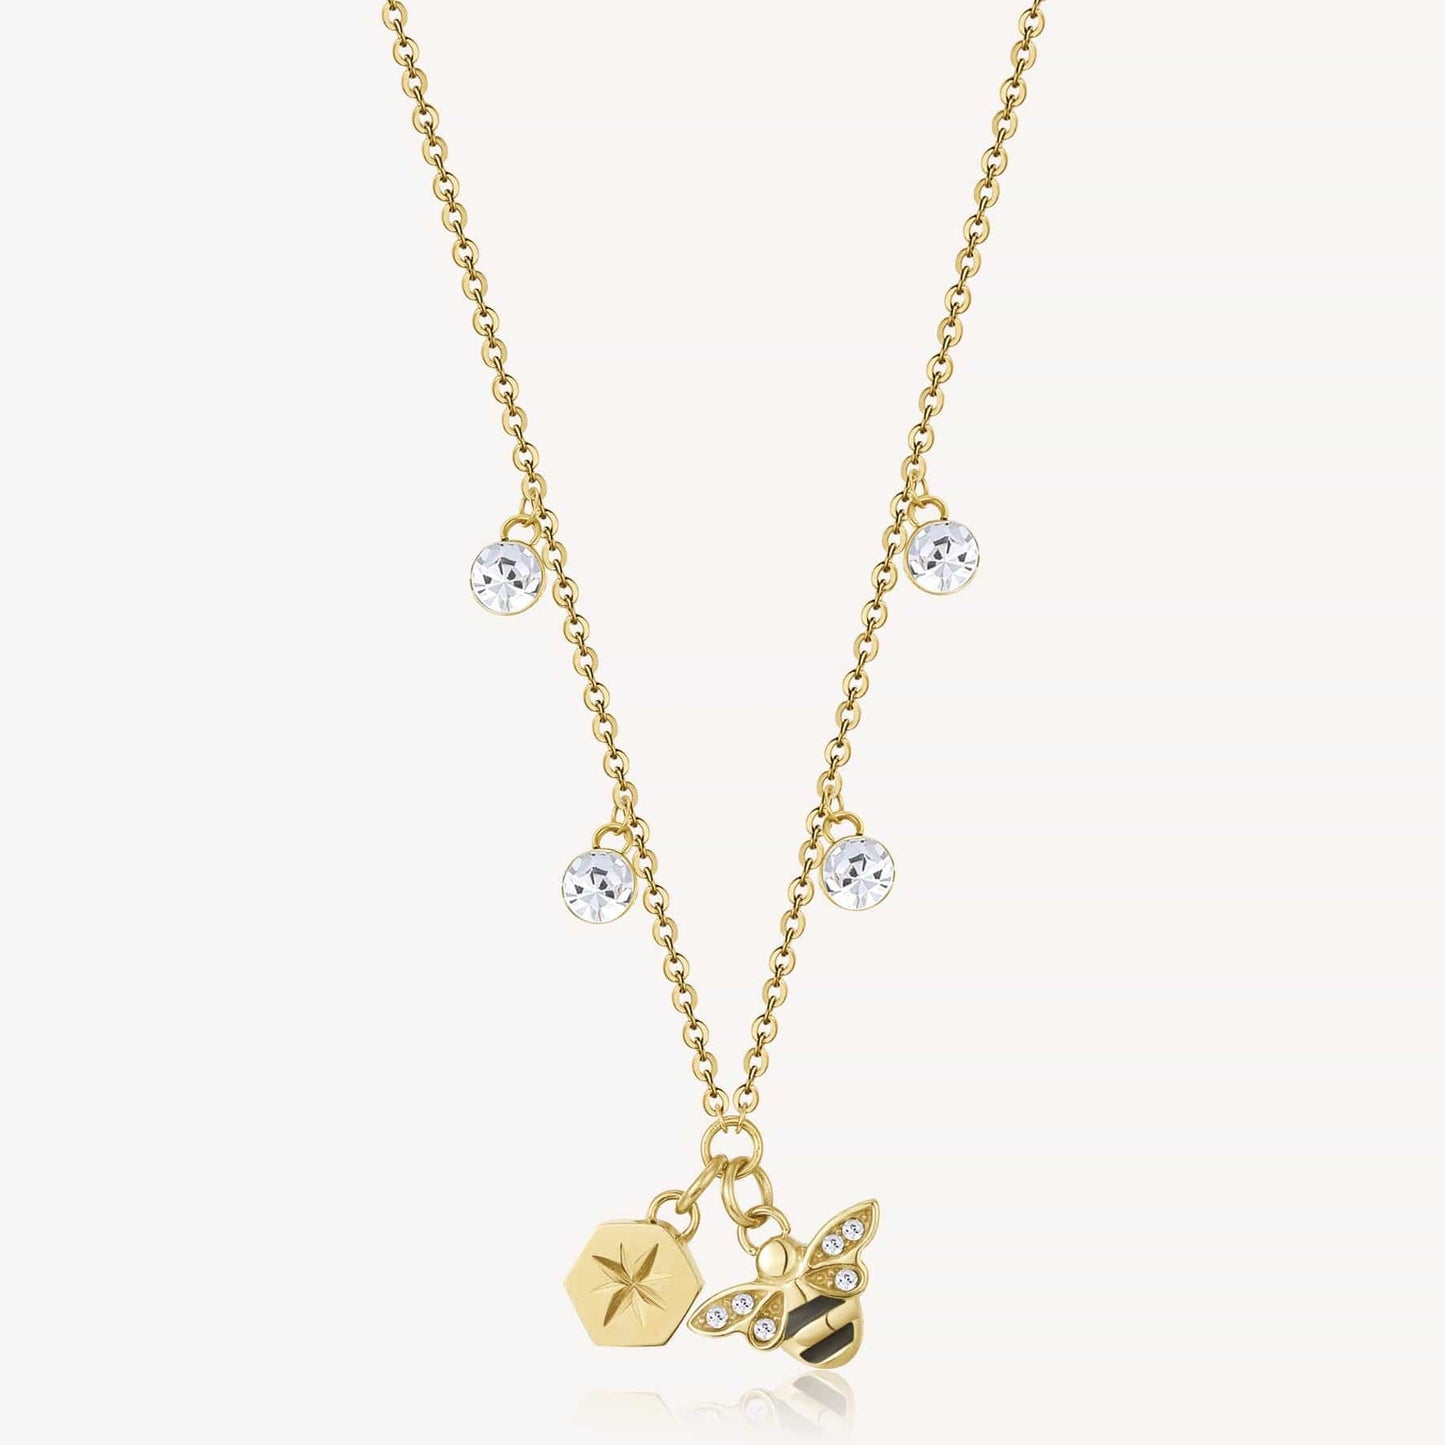 NKL-SS Stainless Steel Gold Tone Chakra Necklace - Bee